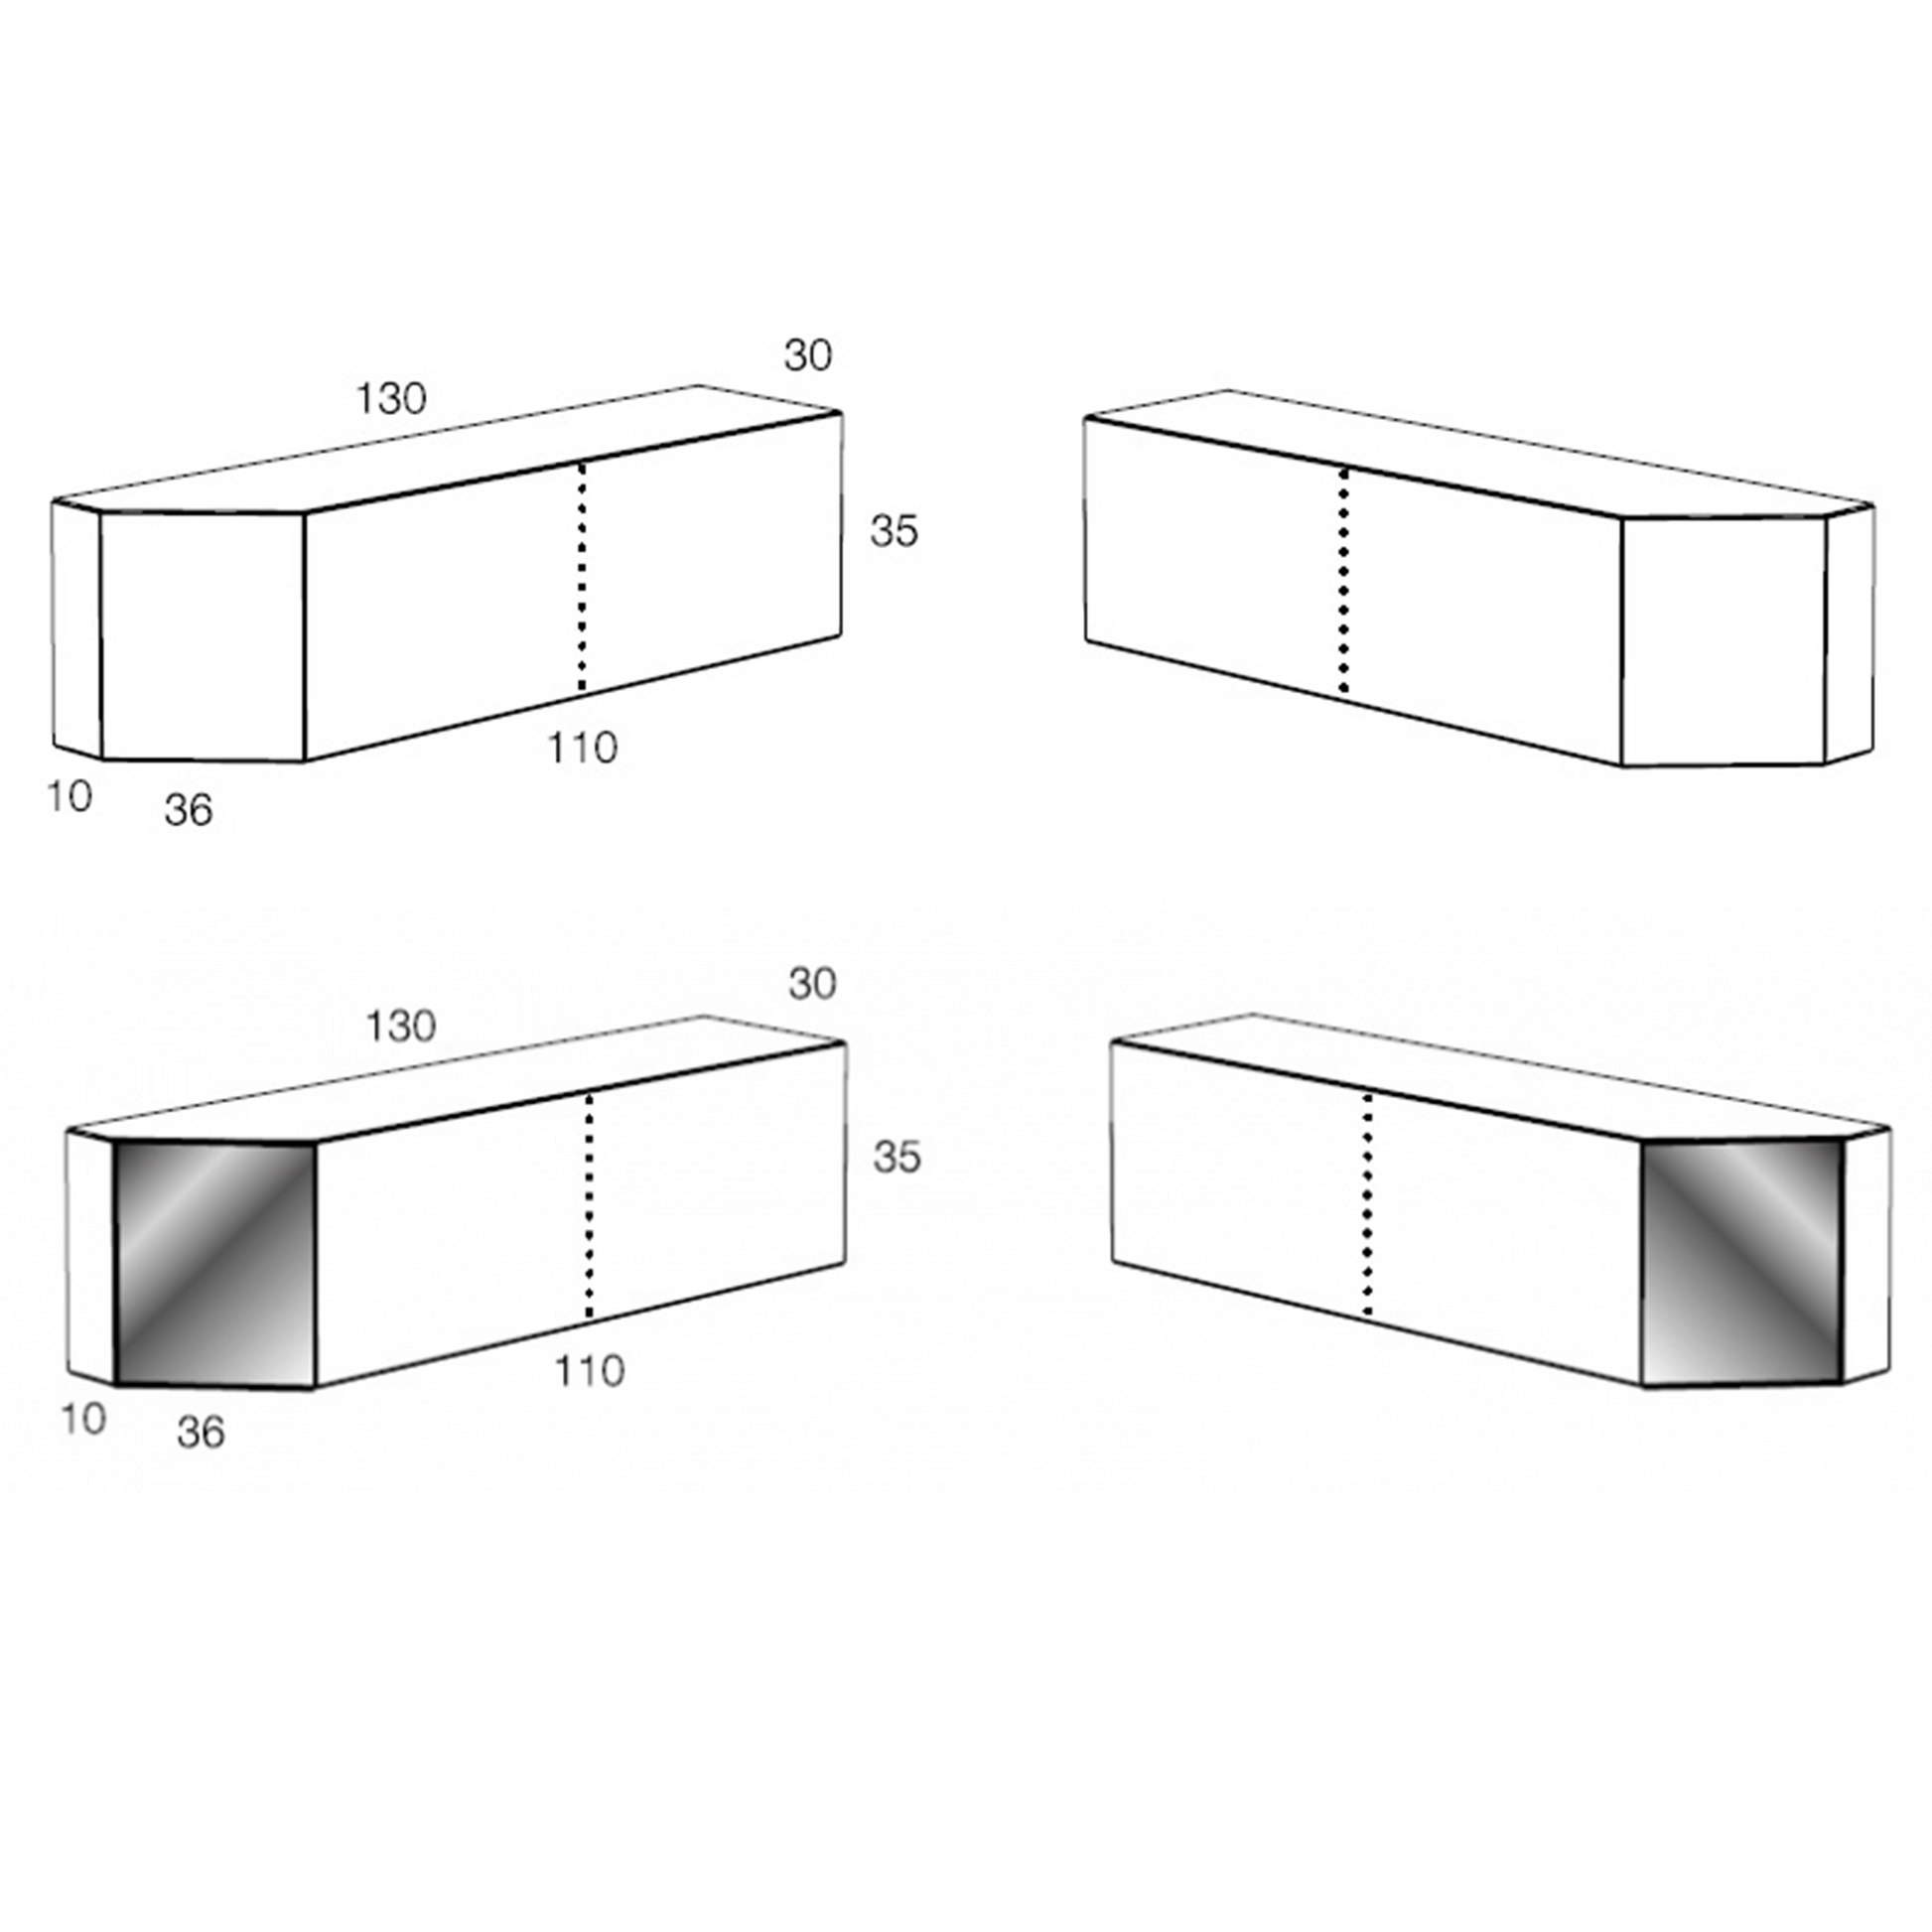 Technical drawing of Canto wall mounted containers, with dimensions.